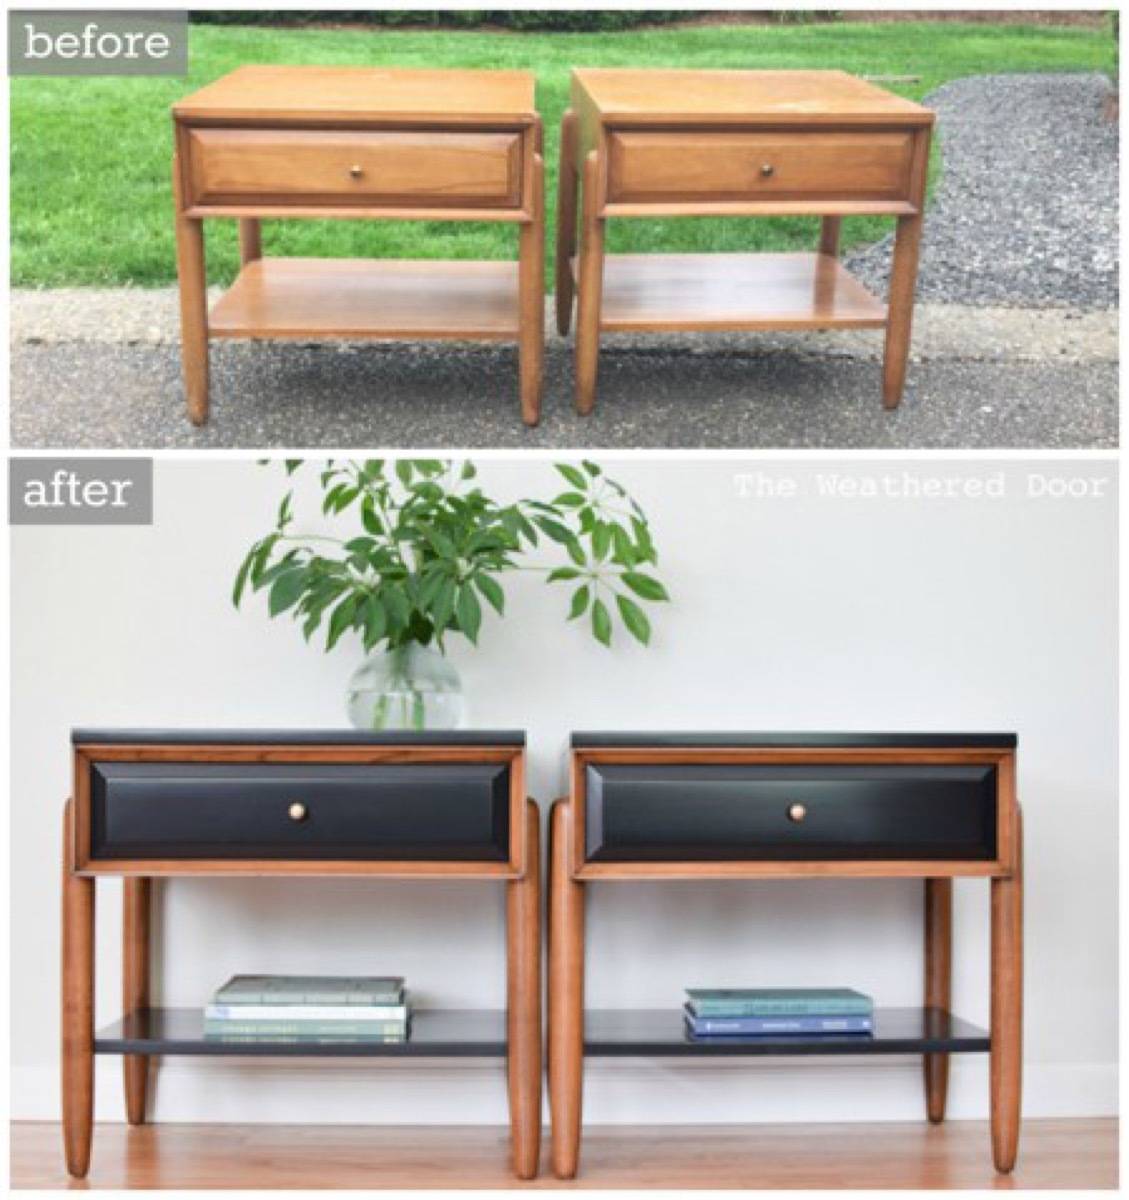 67 Furniture Makeovers That'll Totally Inspire You: Nightstand makeover from The Weathered Door